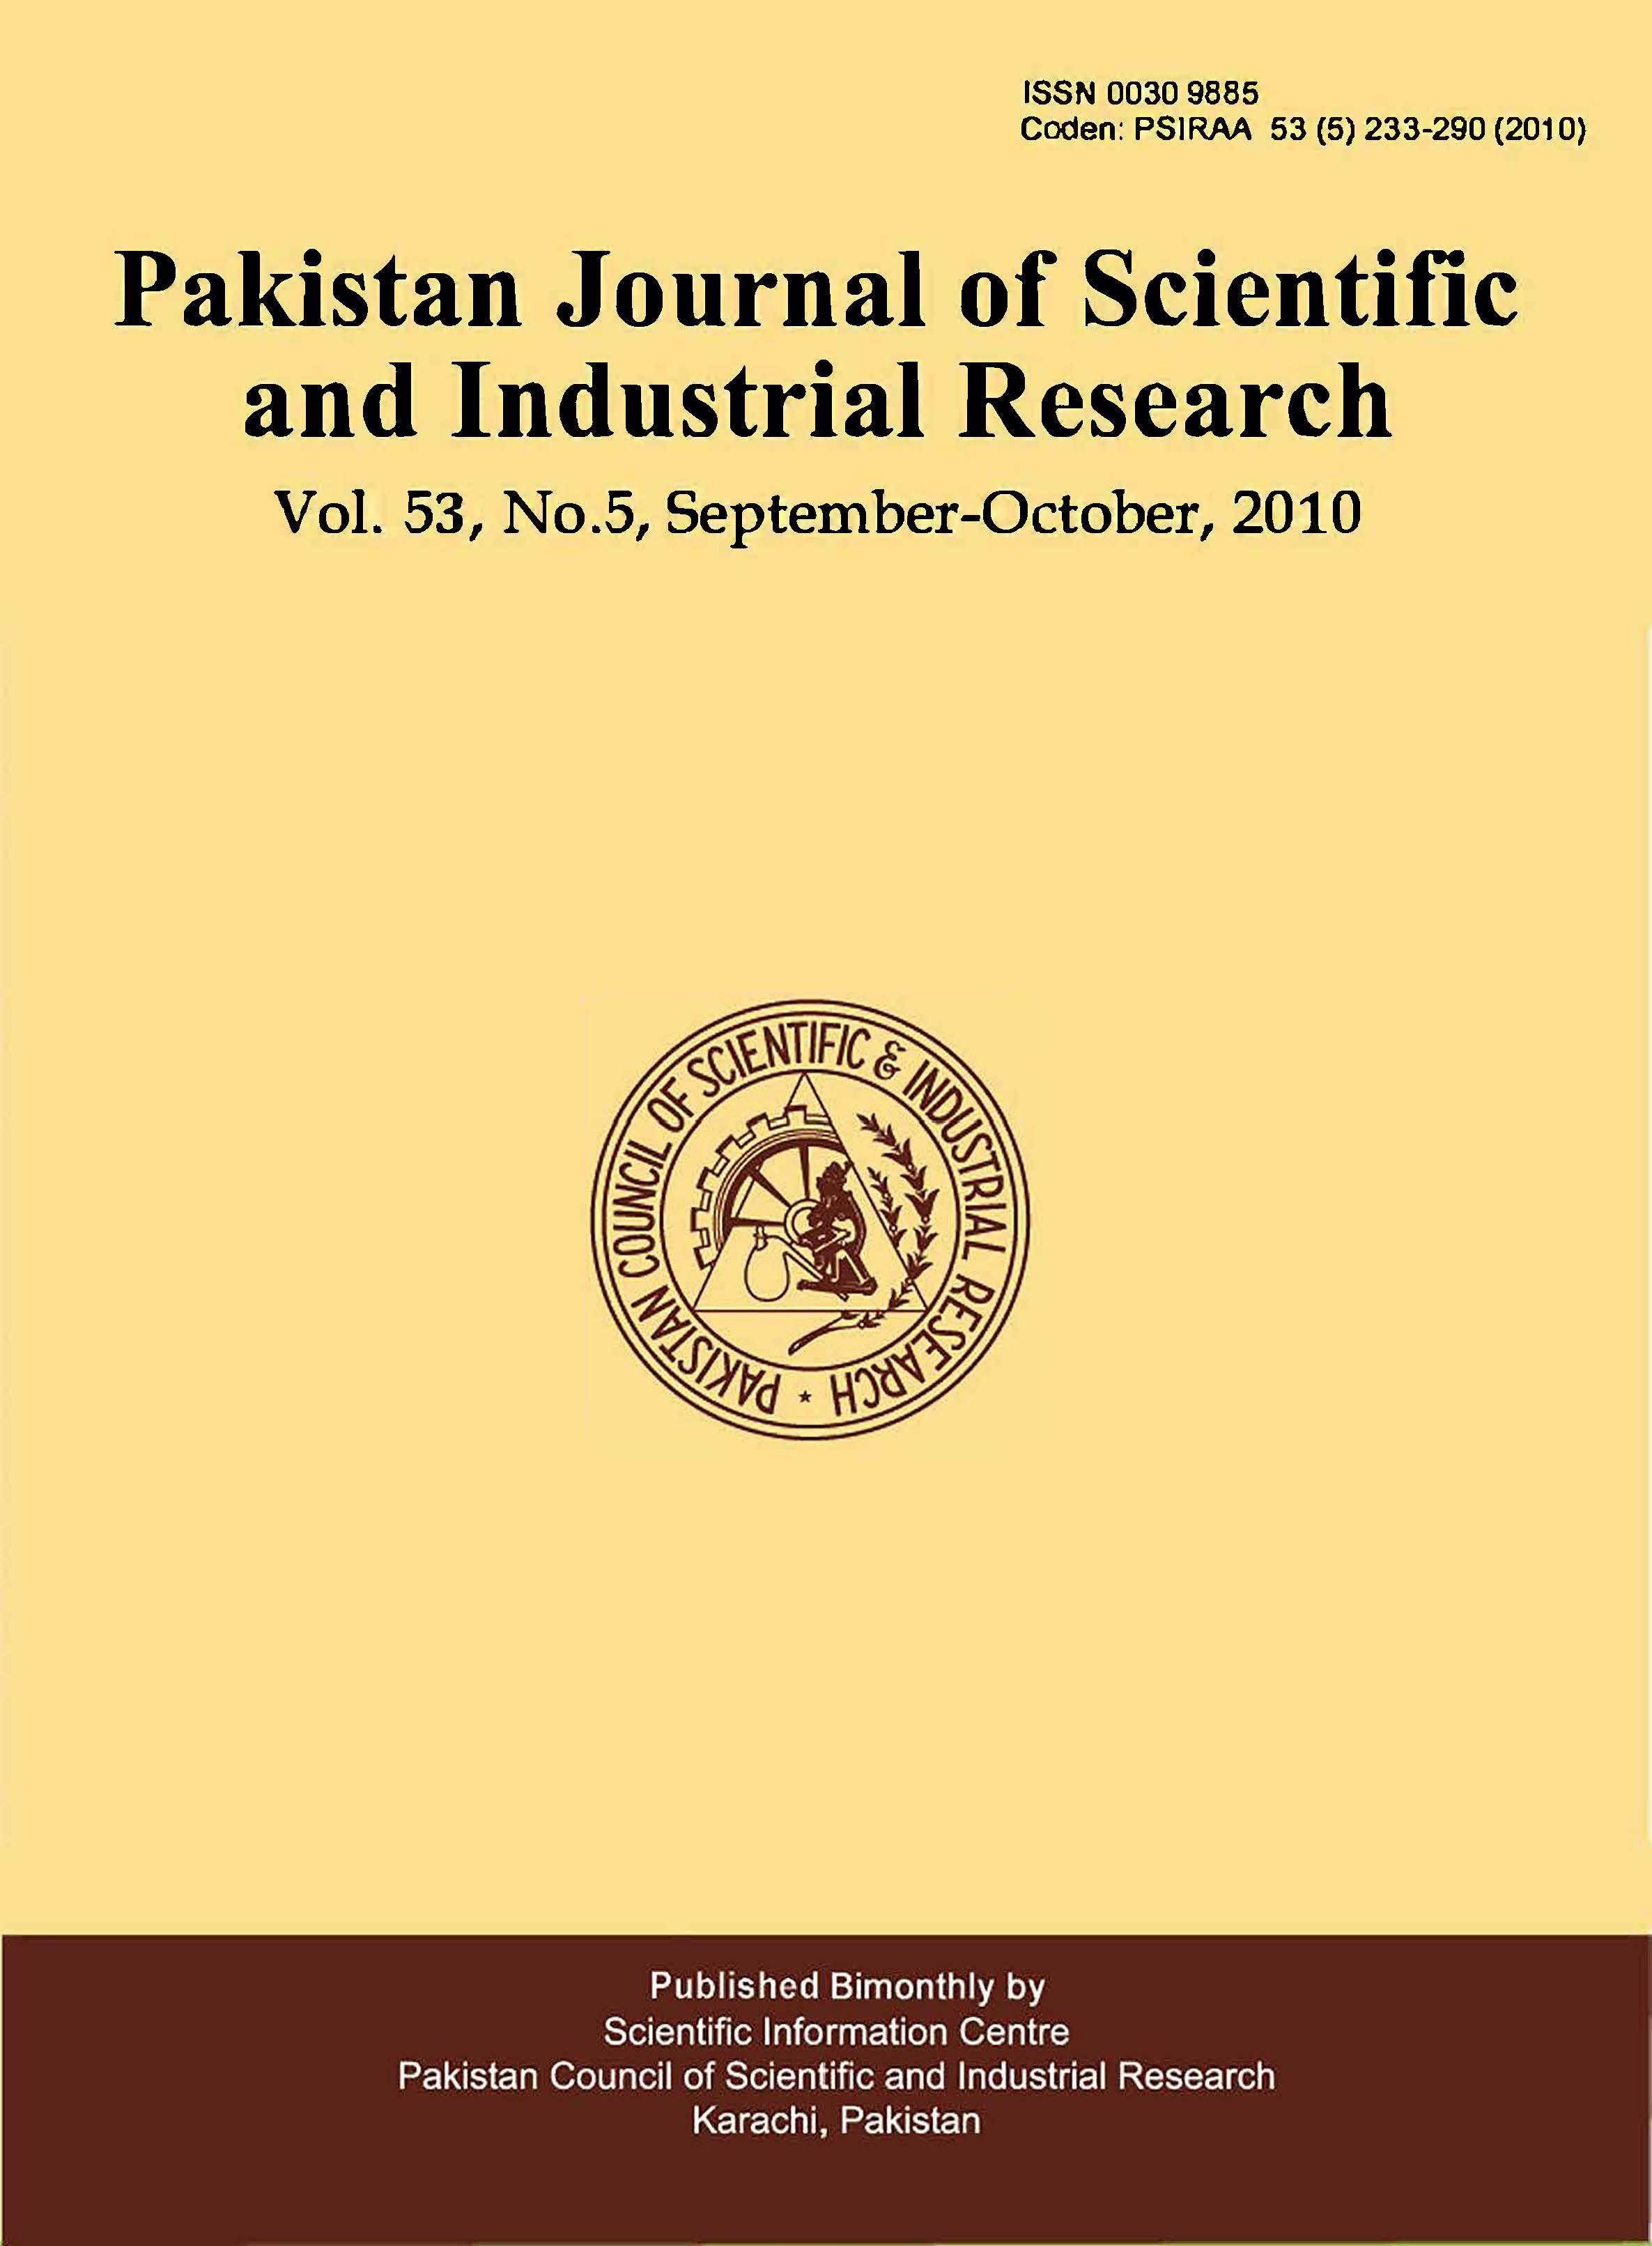 					View Vol. 53 No. 5 (2010): Pakistan Journal of Scientific and Industrial Research
				